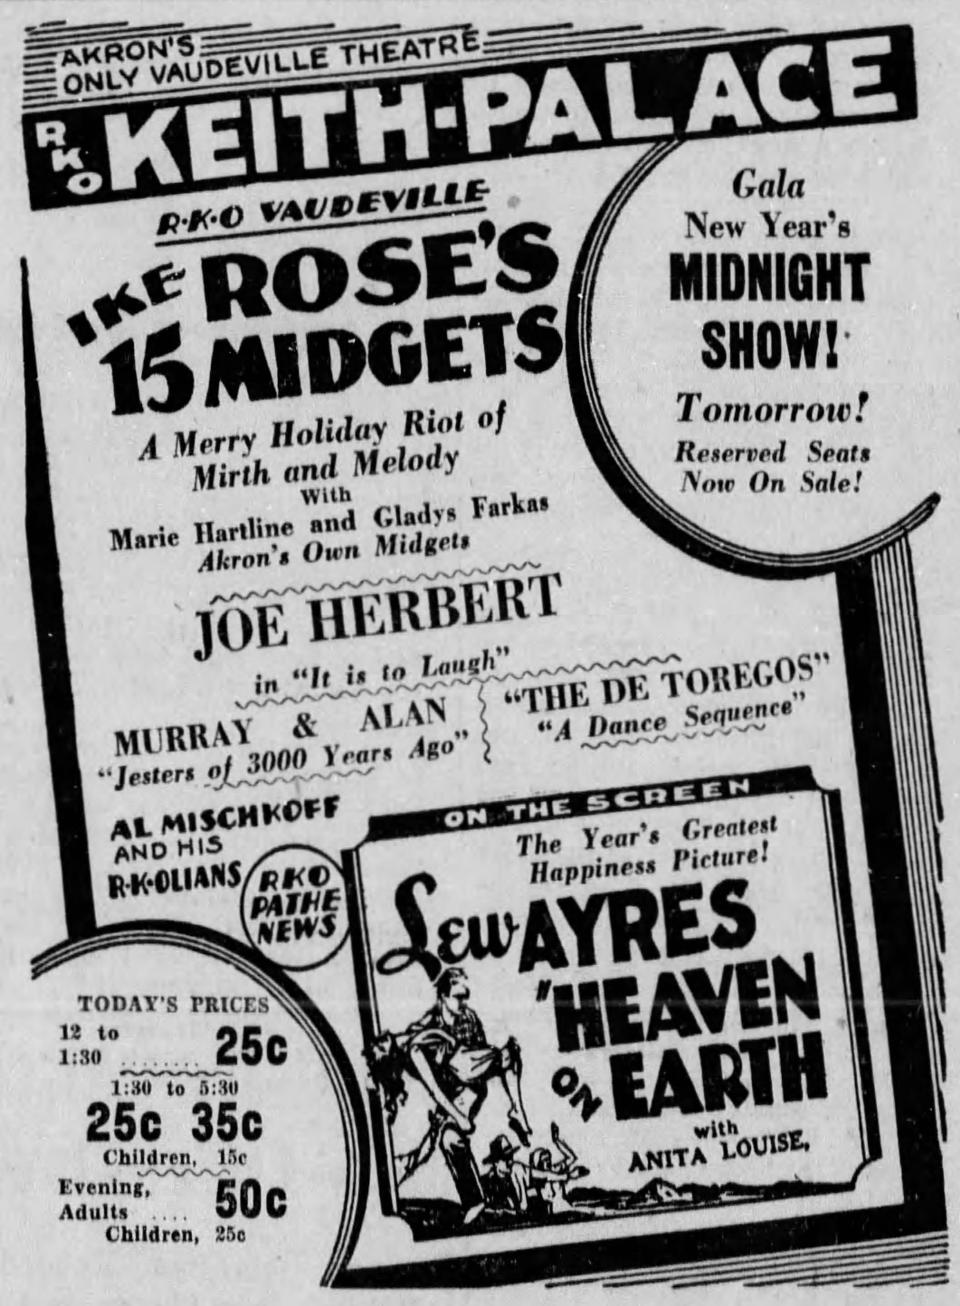 Akron's own Marie Hartline starred in this vaudeville show in December 1931 at the Palace Theater.